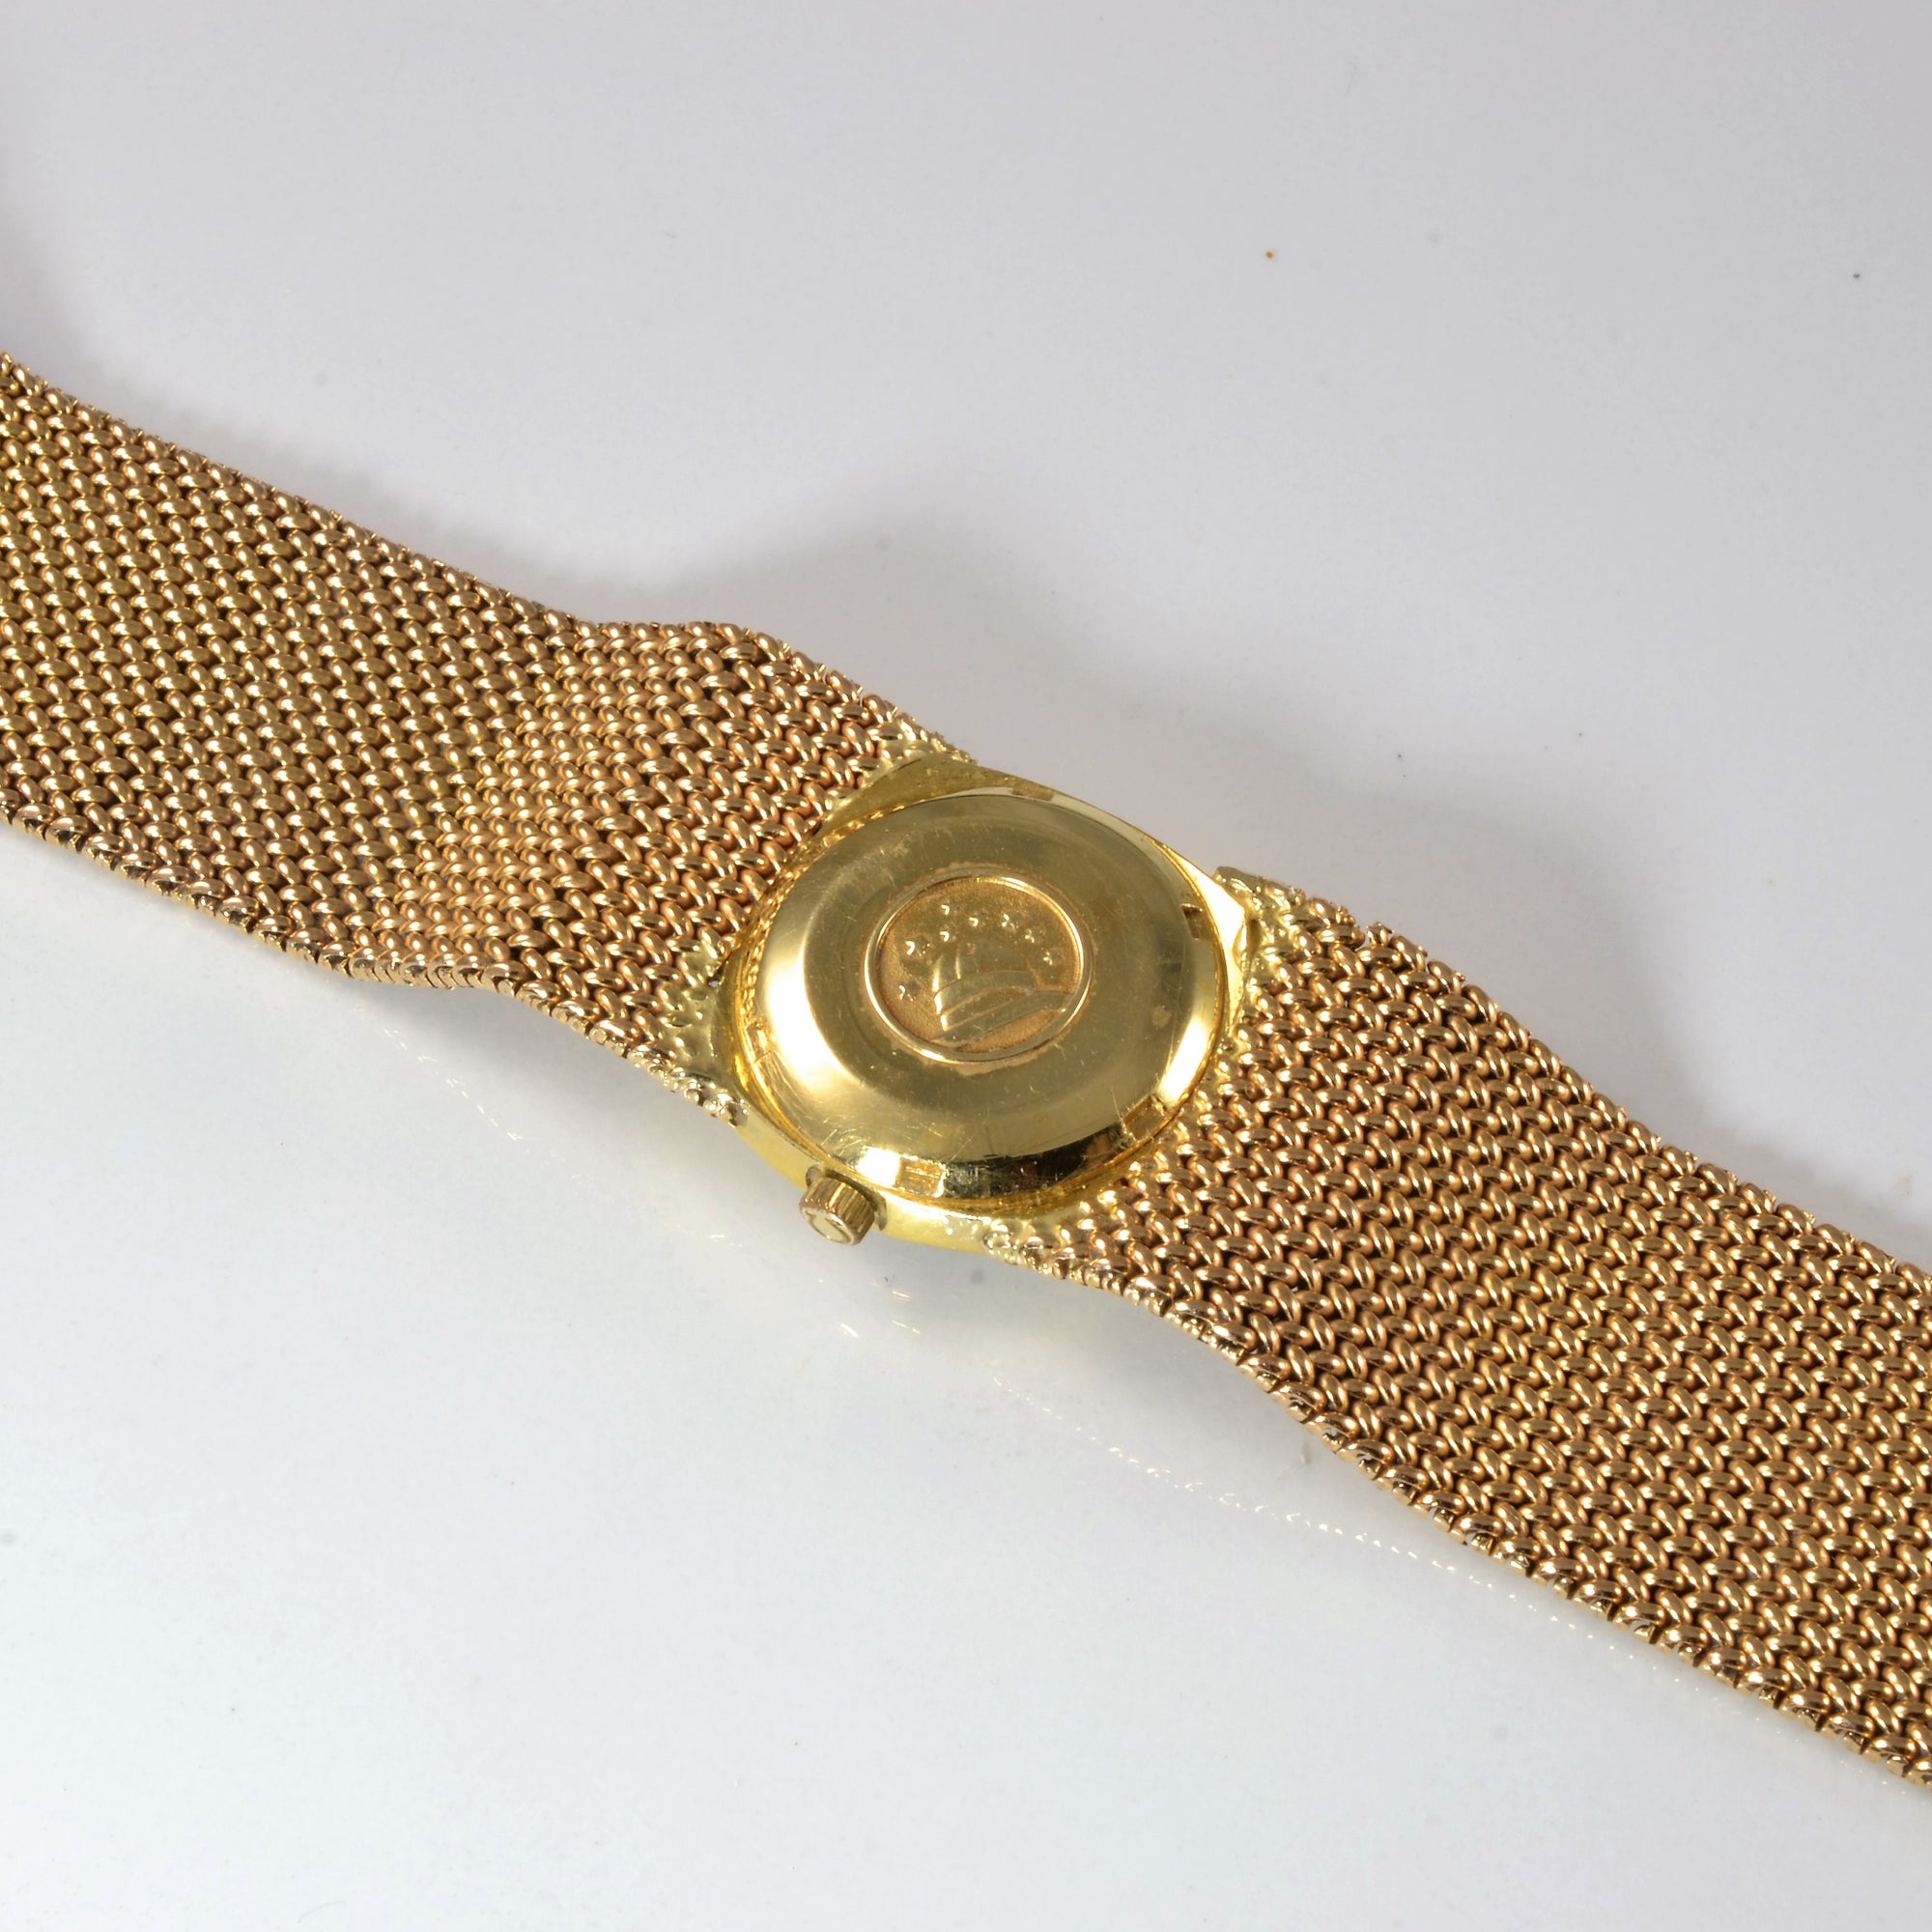 Omega' 1970s Woven Gold Constellation Watch